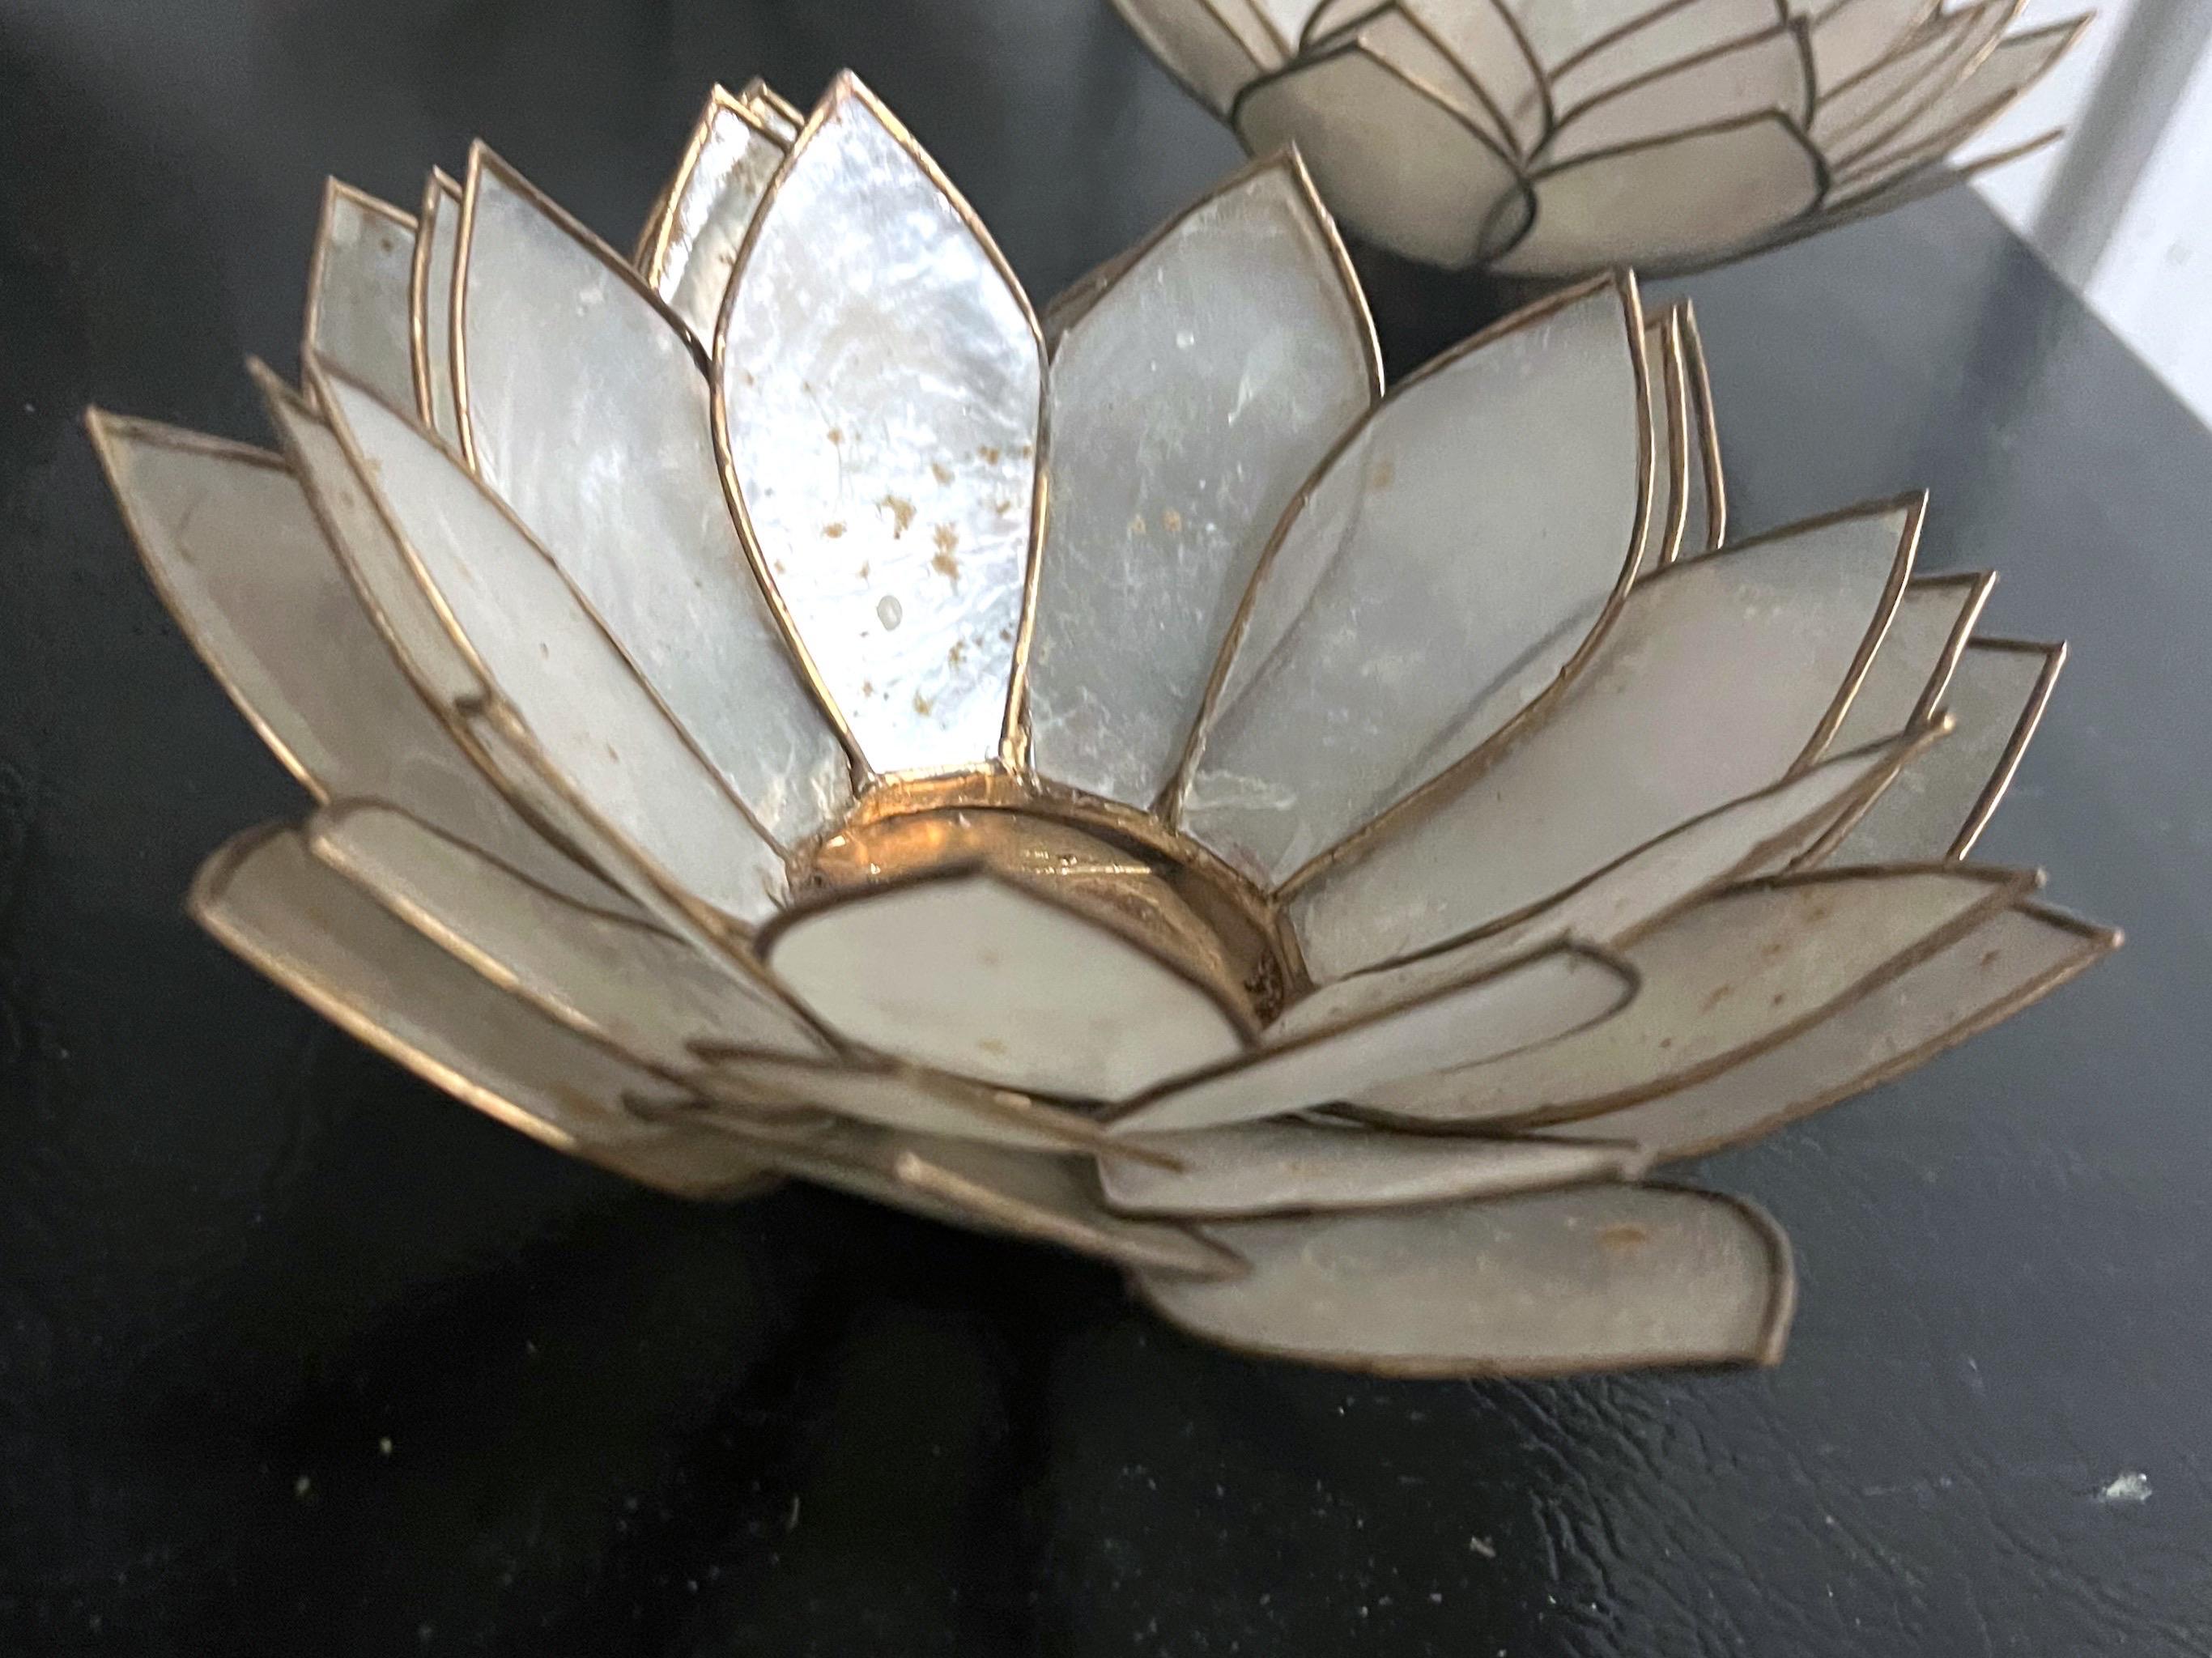 These pretty lotus form tea light candle holders are just so pretty. They are made of capiz shell and a gold tone metal. This is a set of 5.